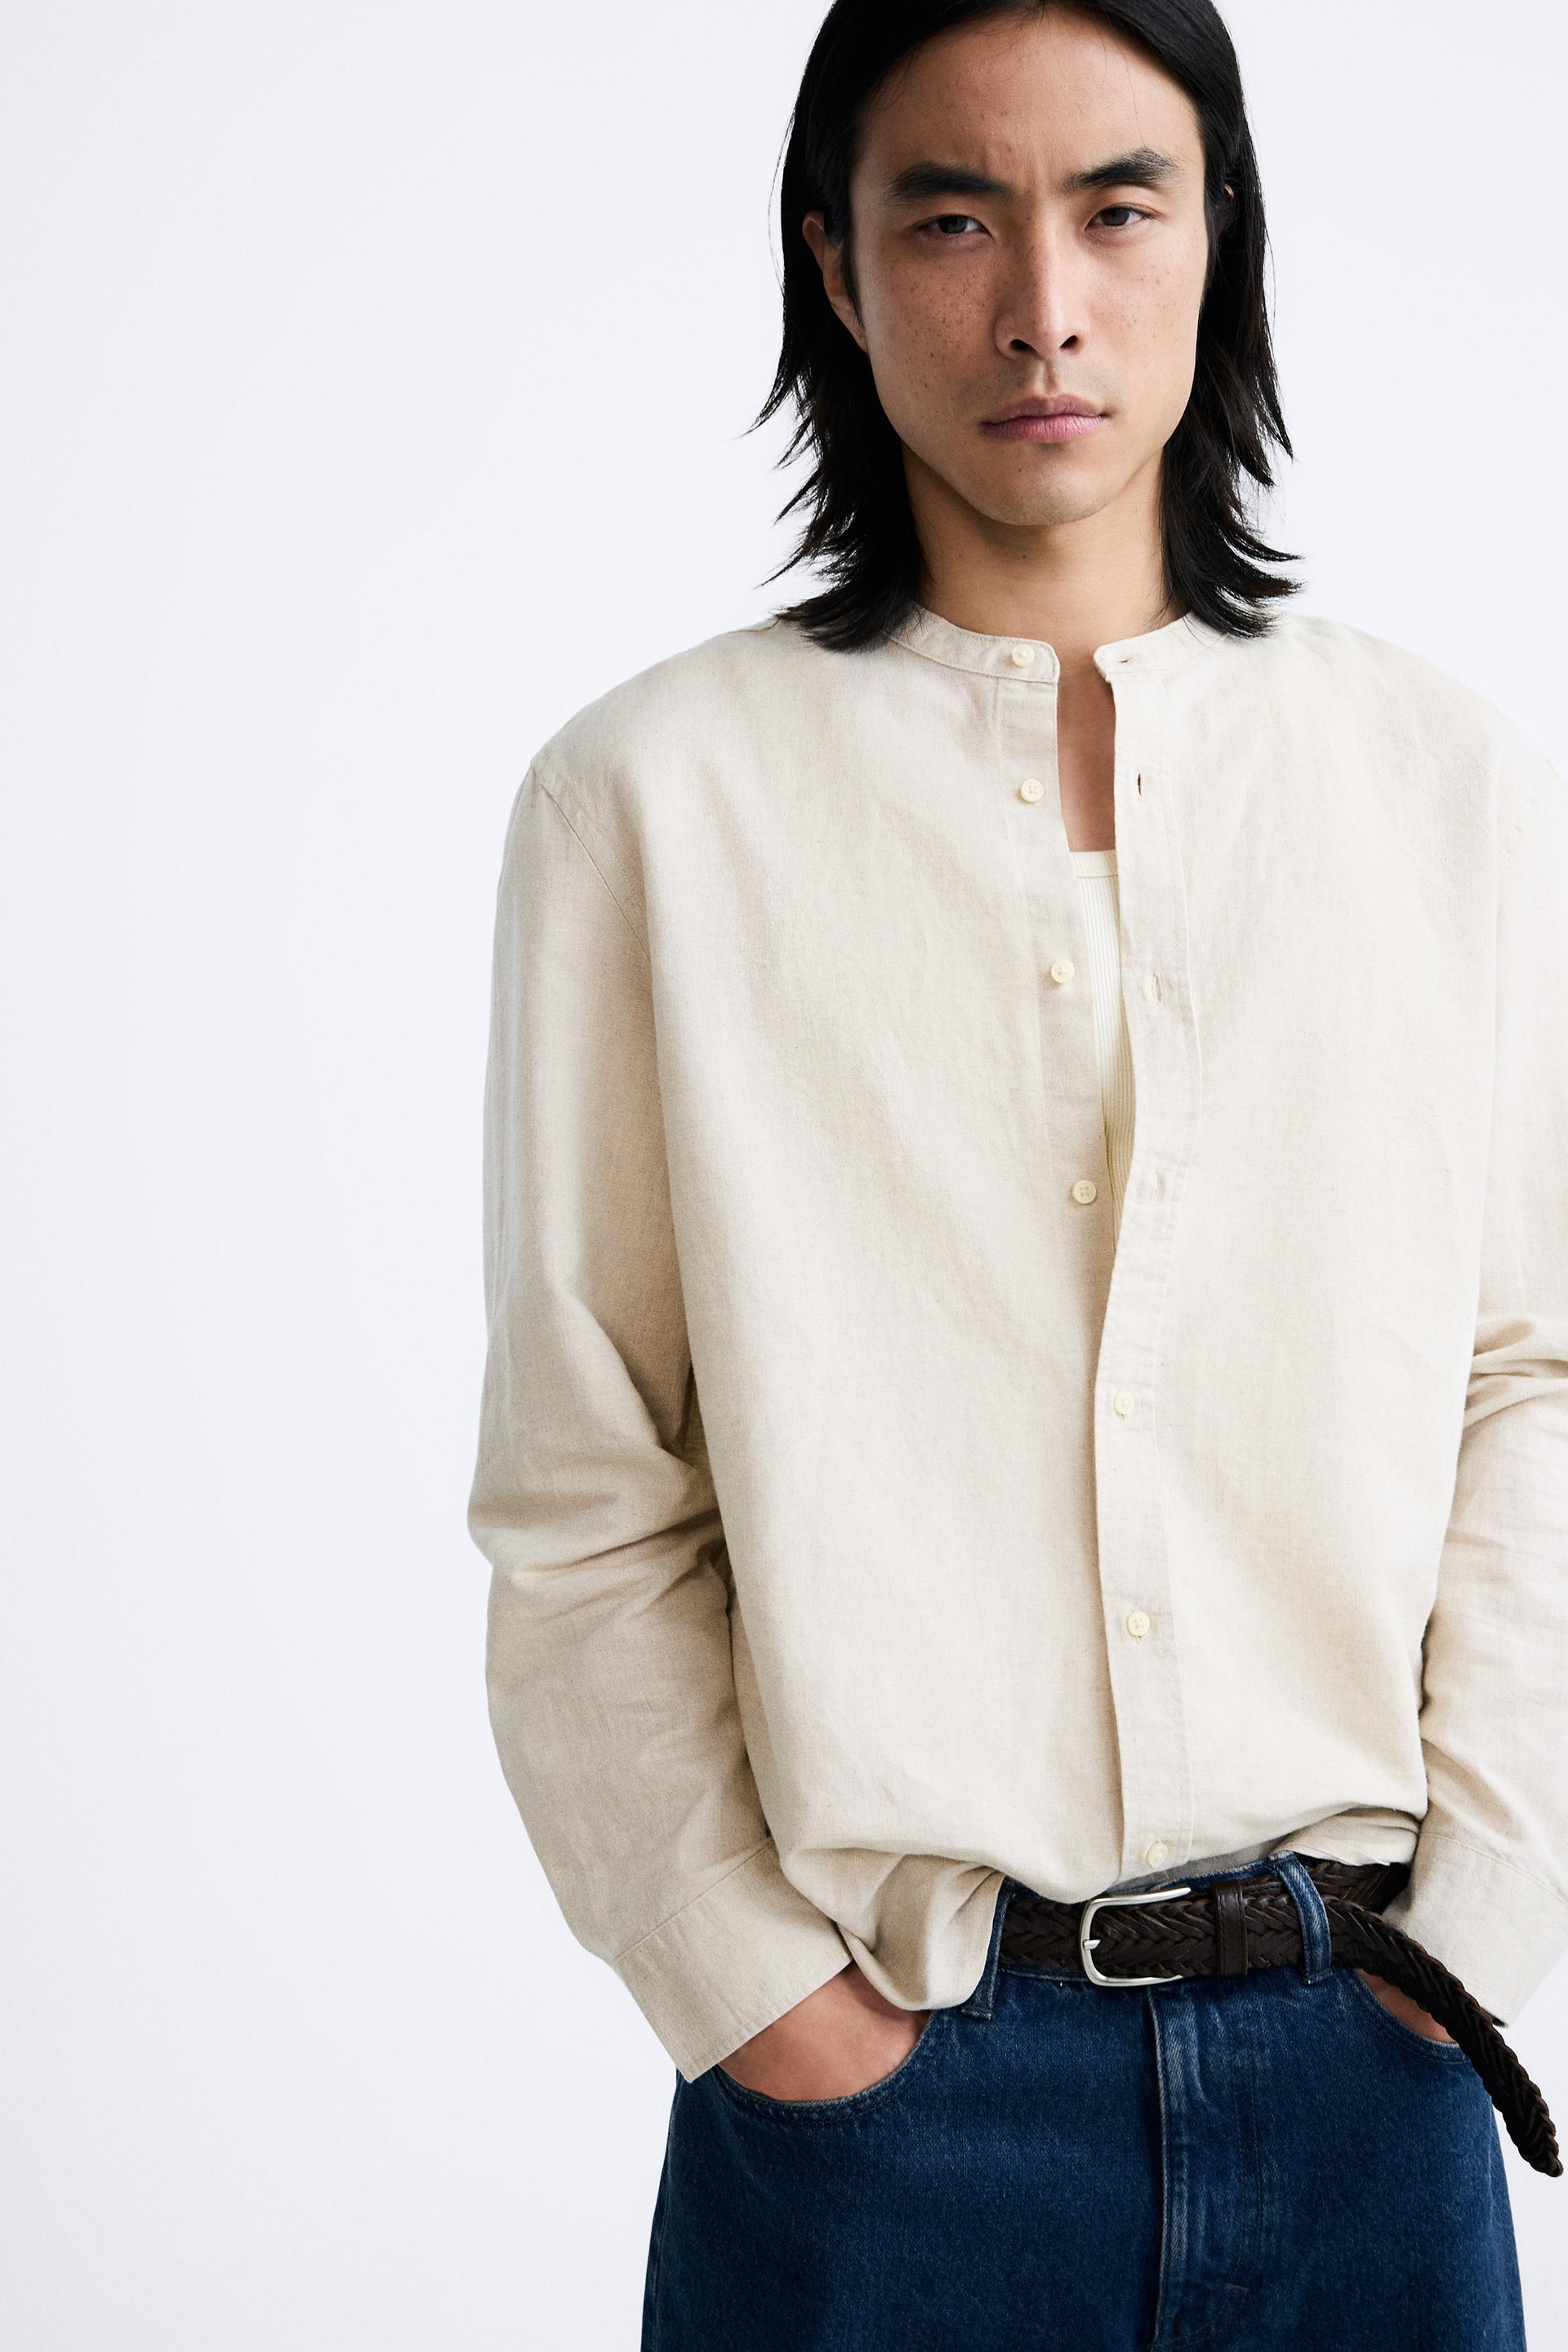 The Zara Linen Shirt That's Under £30 – And Available in Four